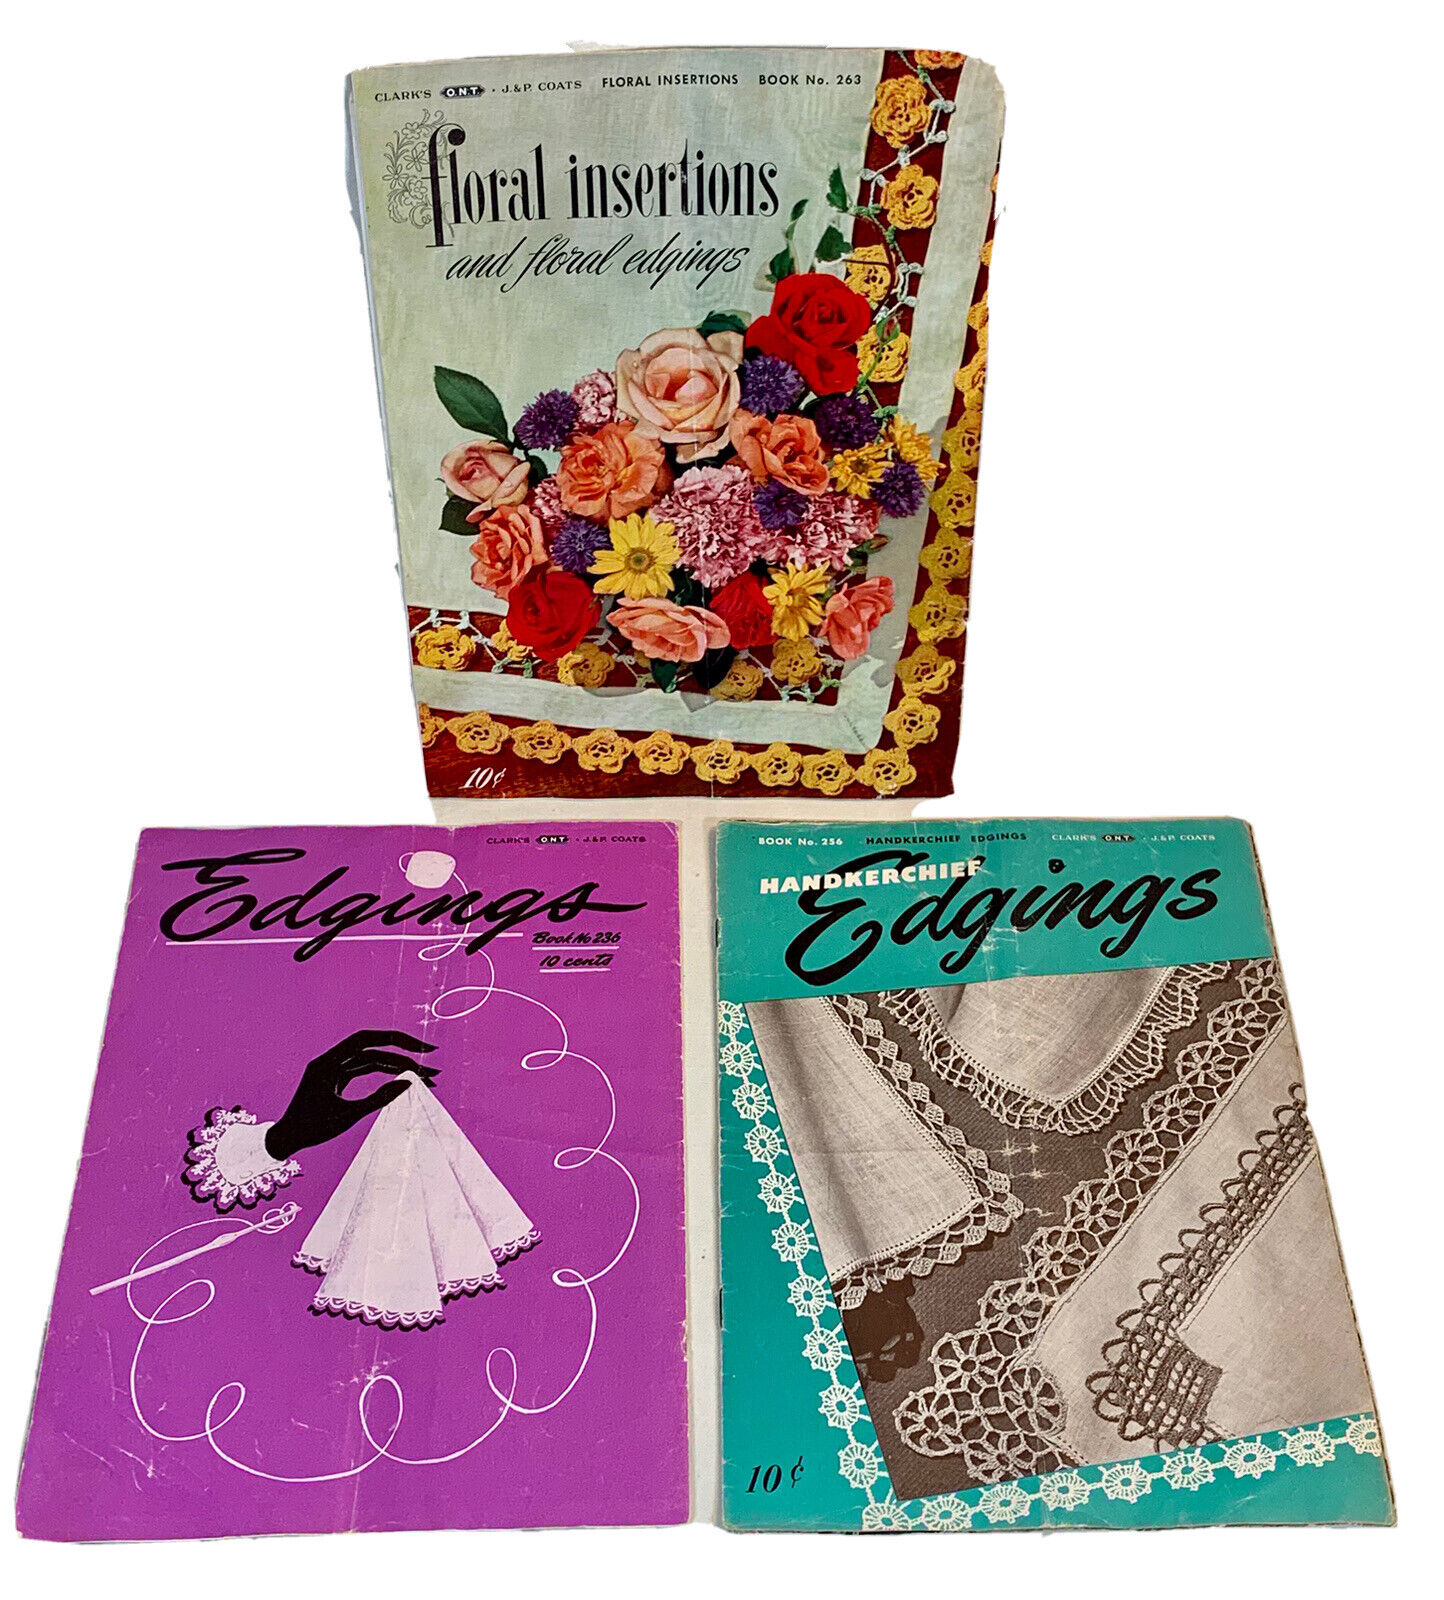 Lot 3 Coats and clarks booklets vintage 1940s handkerchief edging books AS IS